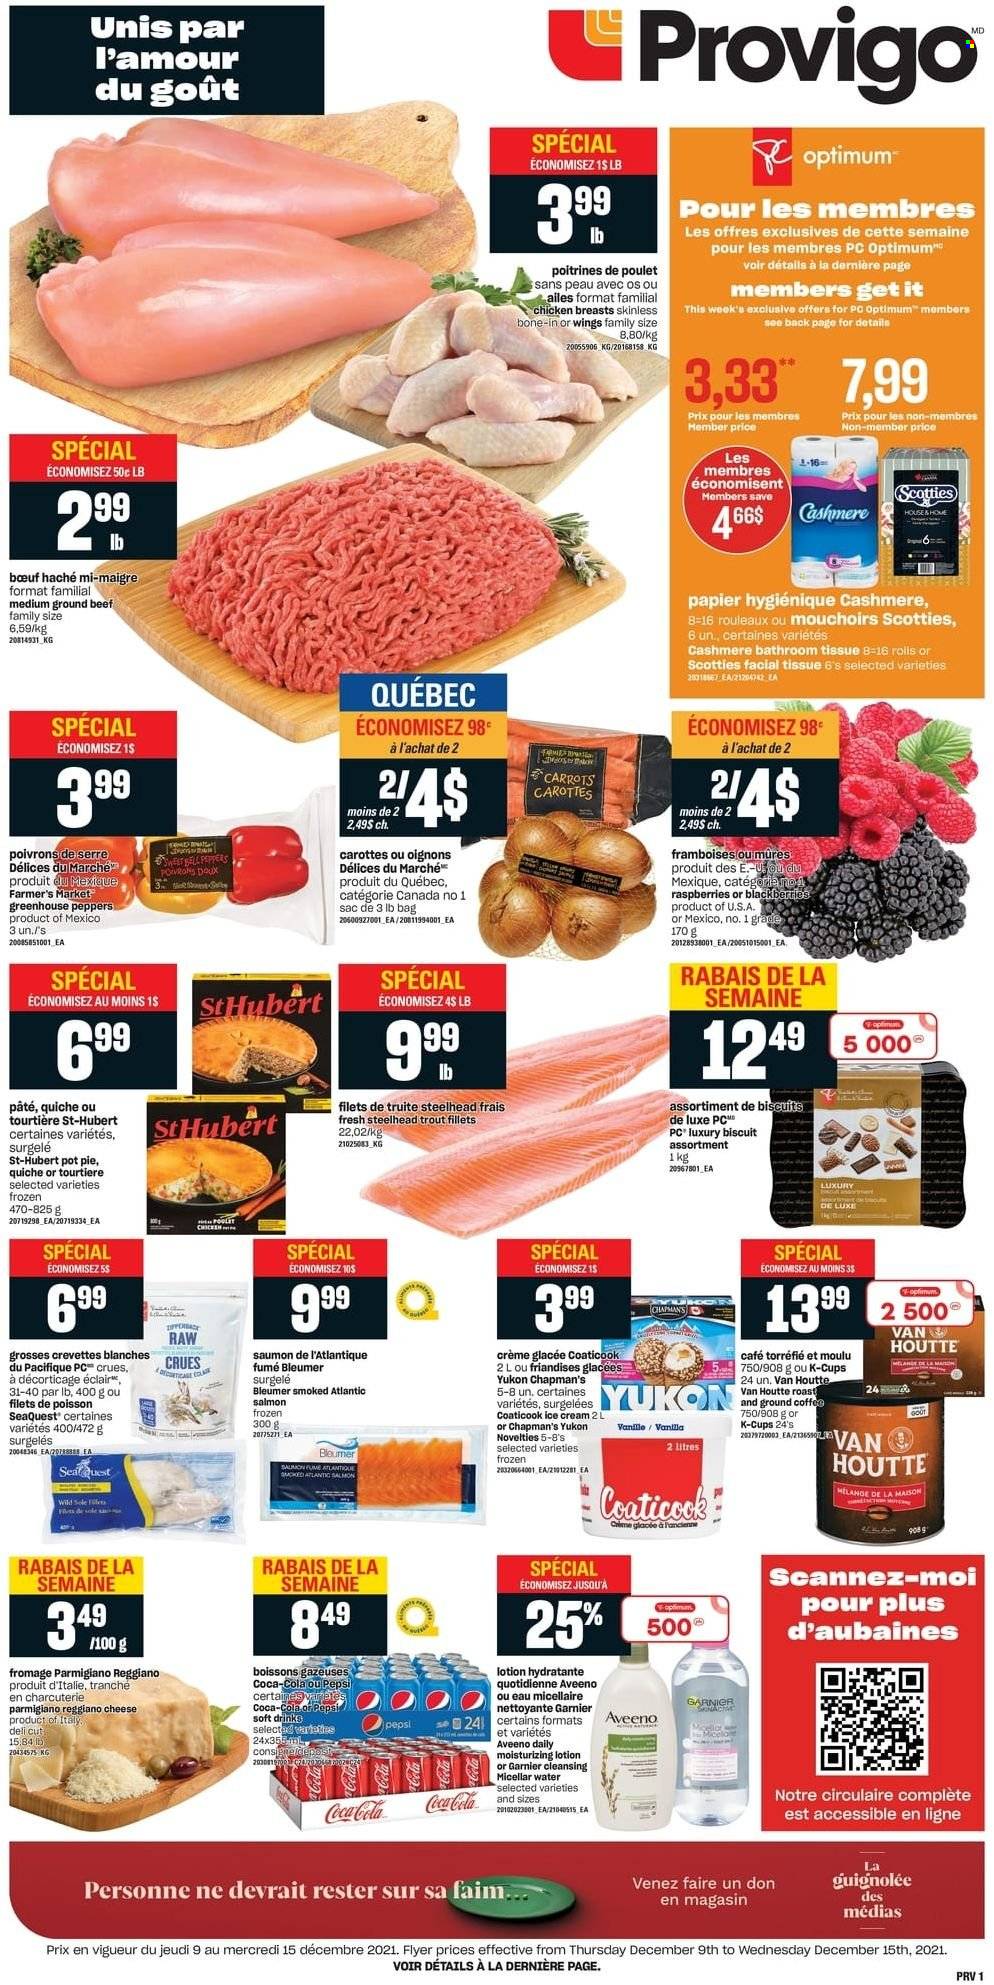 thumbnail - Provigo Flyer - December 09, 2021 - December 15, 2021 - Sales products - pie, pot pie, carrots, peppers, salmon, trout, cheese, Parmigiano Reggiano, ice cream, quiche, biscuit, Coca-Cola, Pepsi, soft drink, coffee capsules, K-Cups, chicken breasts, beef meat, ground beef, Aveeno, bath tissue, micellar water, body lotion, Garnier. Page 1.